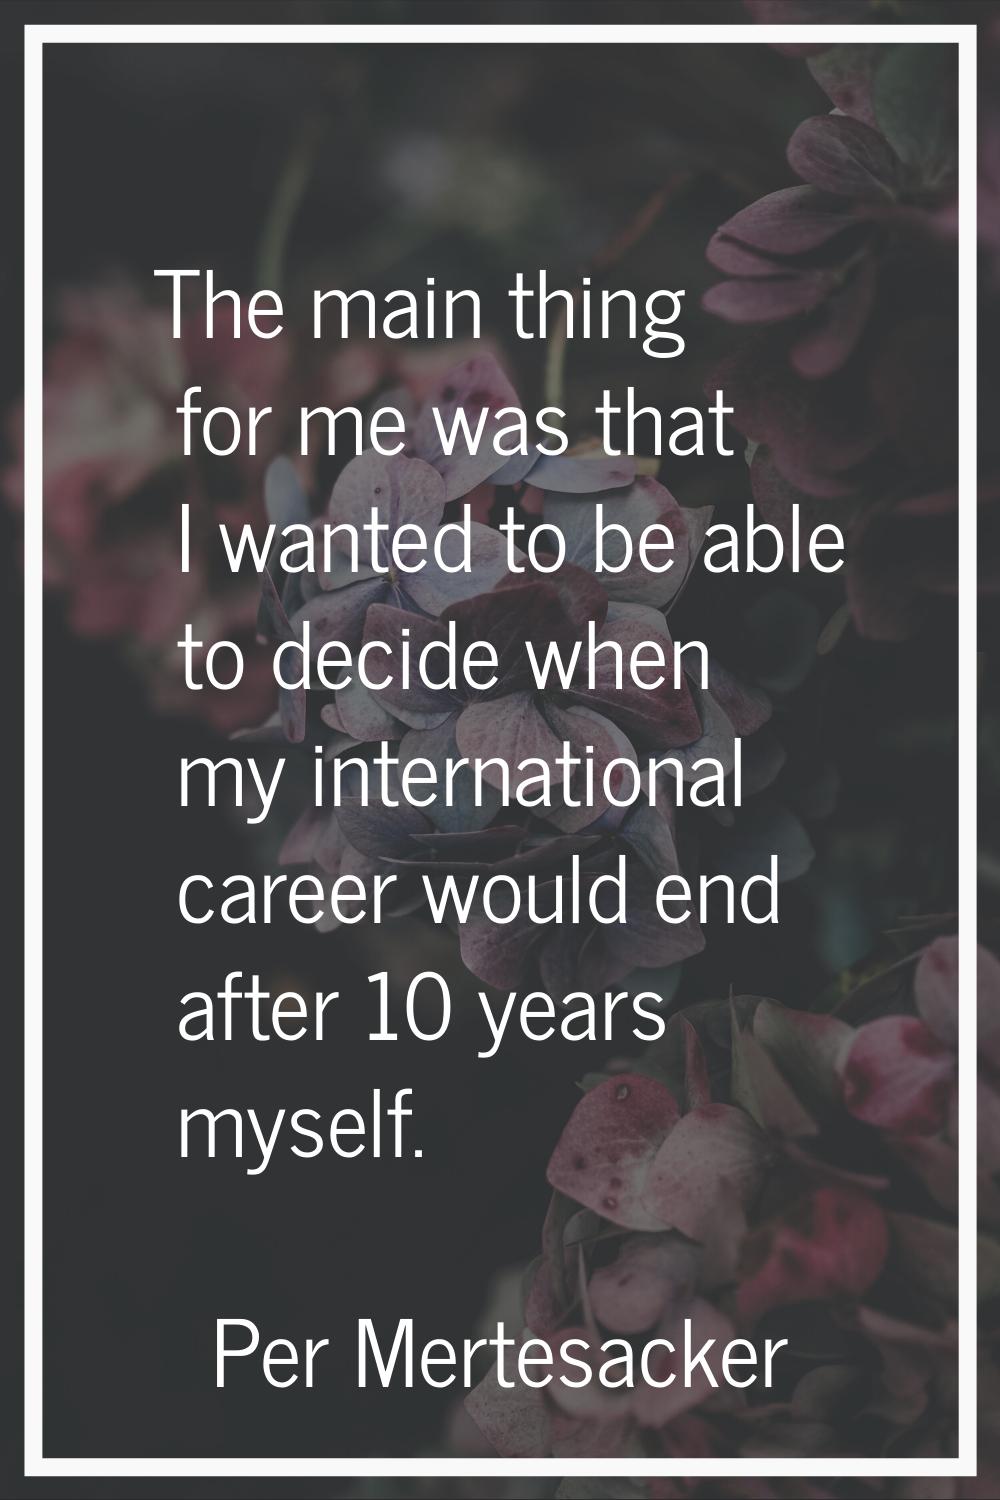 The main thing for me was that I wanted to be able to decide when my international career would end